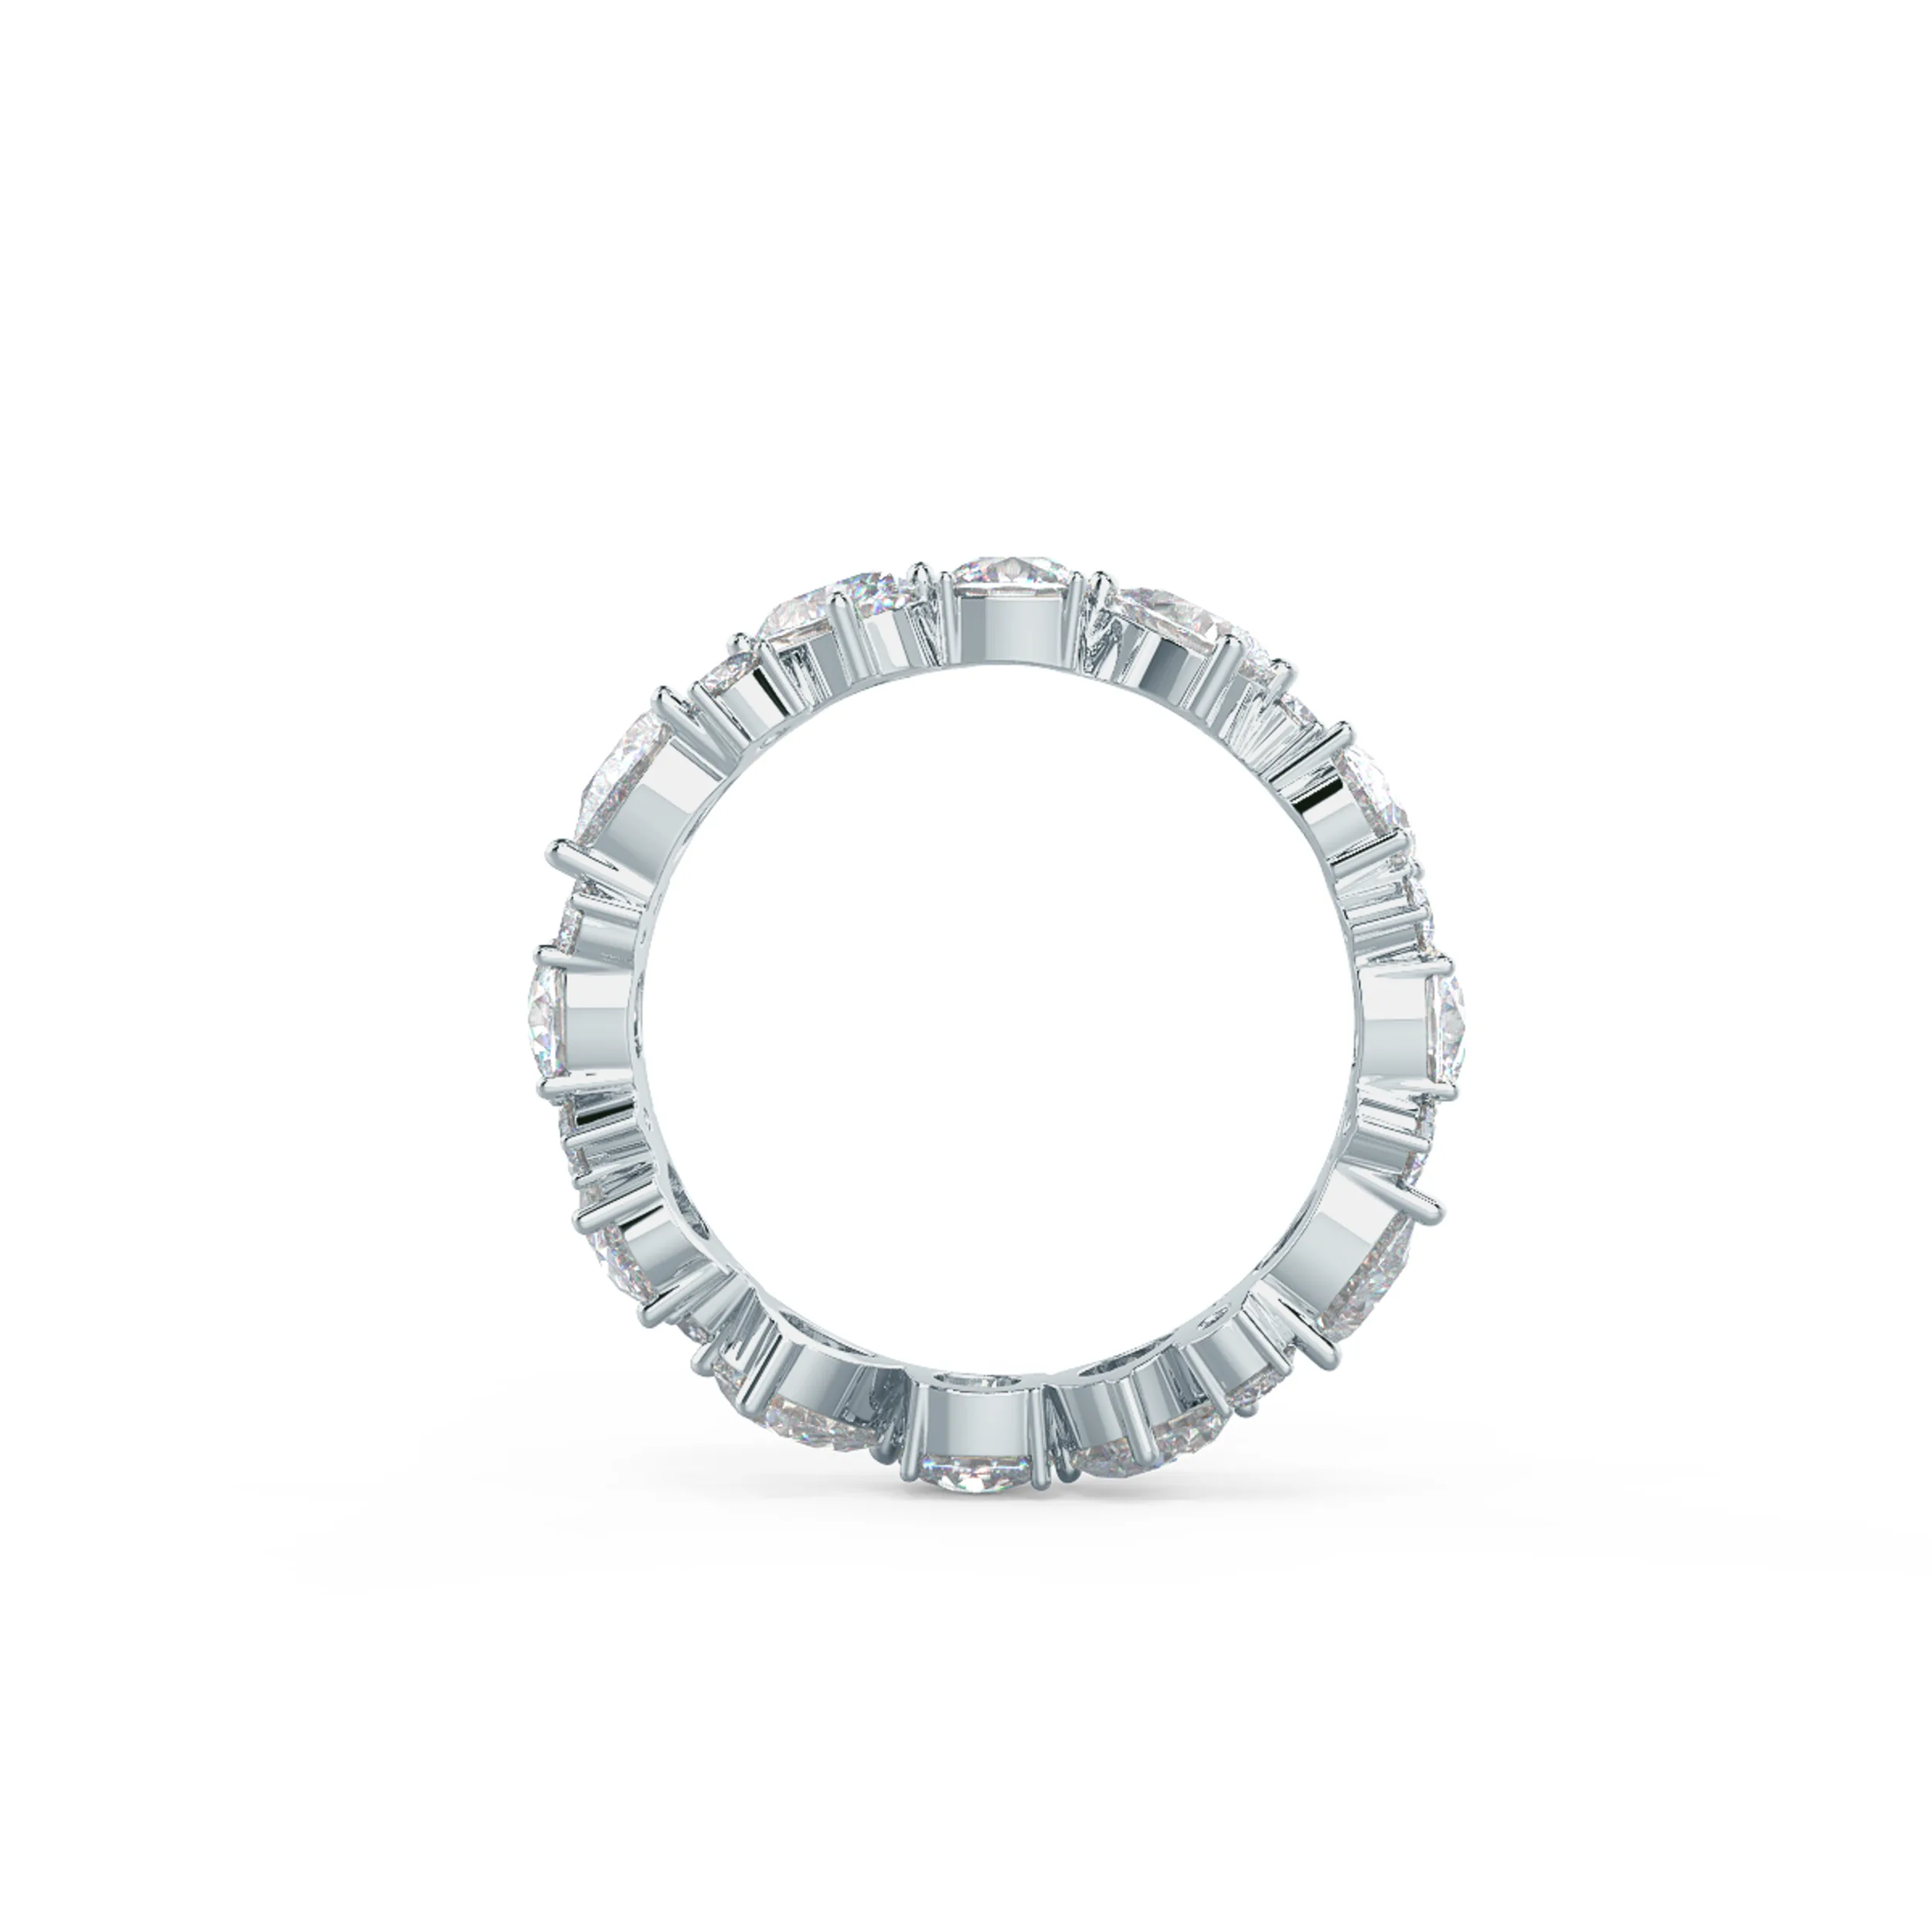 Hand Selected 3.25 ctw Lab Created Diamonds set in 18k White Gold Mary Eternity Band (Profile View)